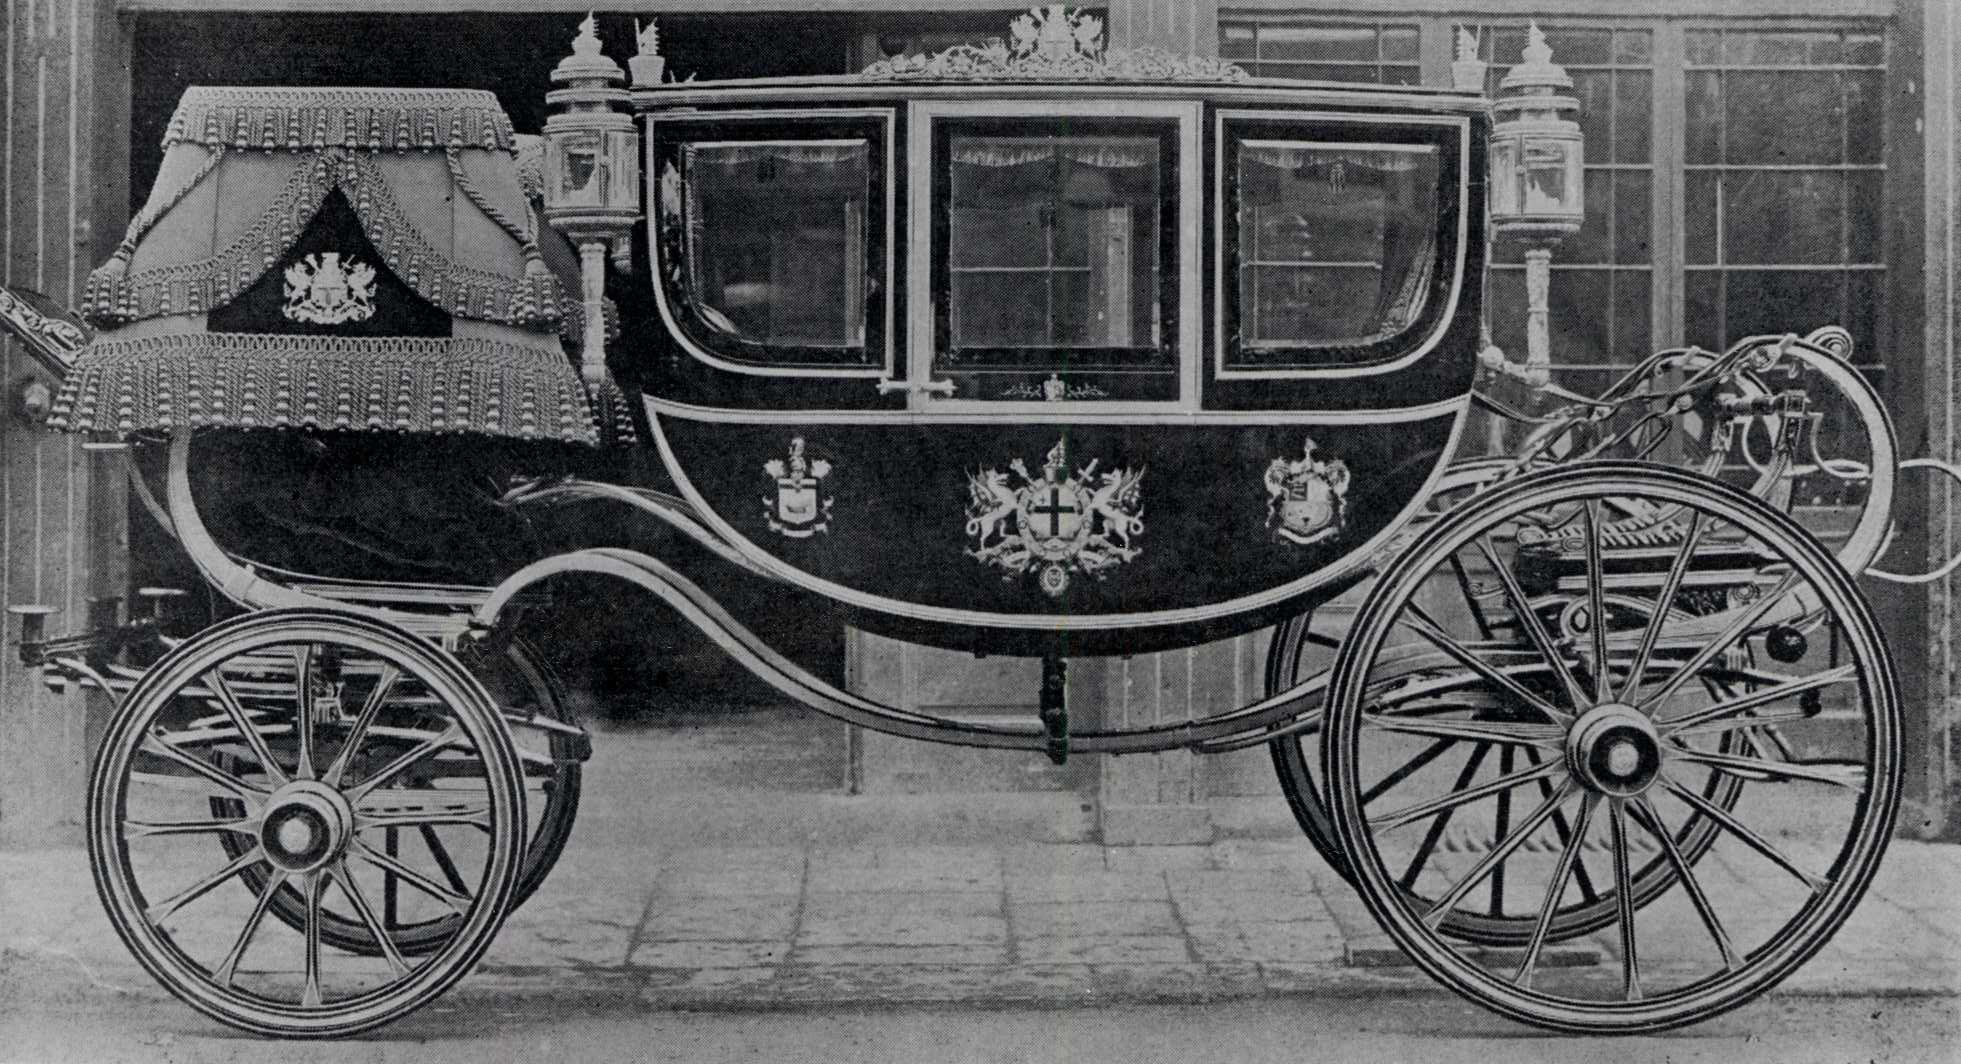 The state coach McNaught’s built for the Lord Mayor of London